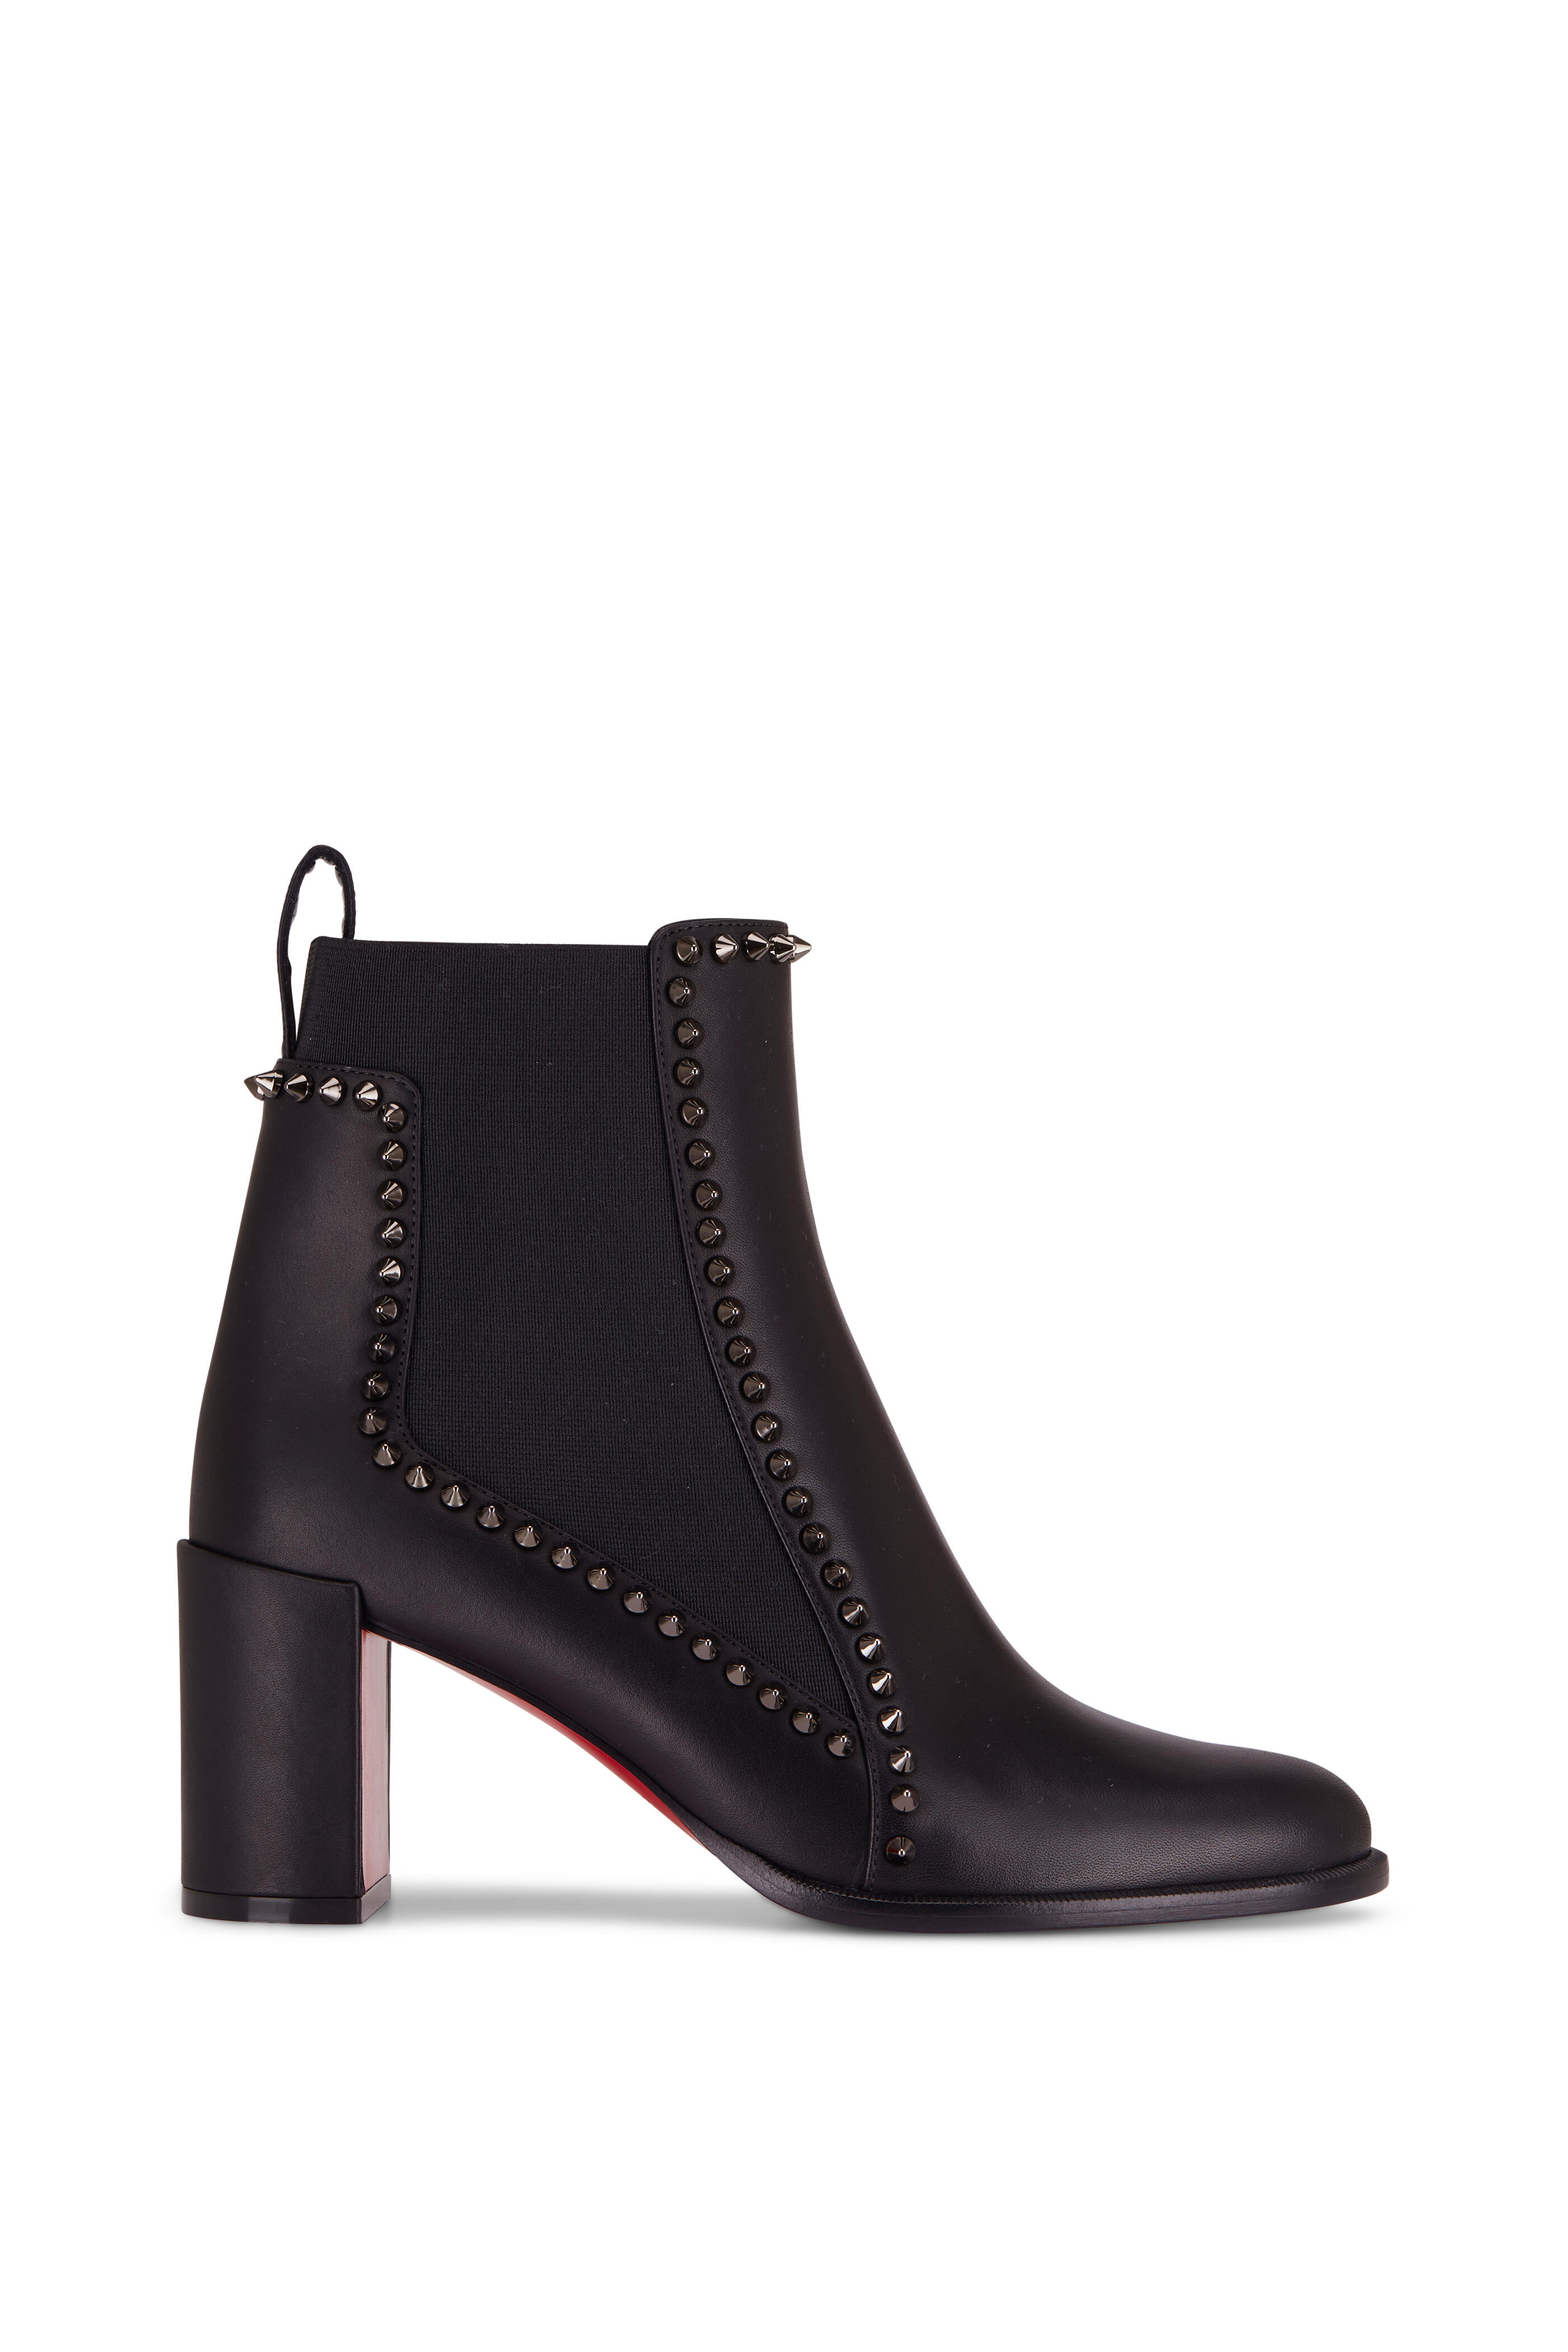 Christian Louboutin Women's Winter Spikes Heeled Boots Leather 70